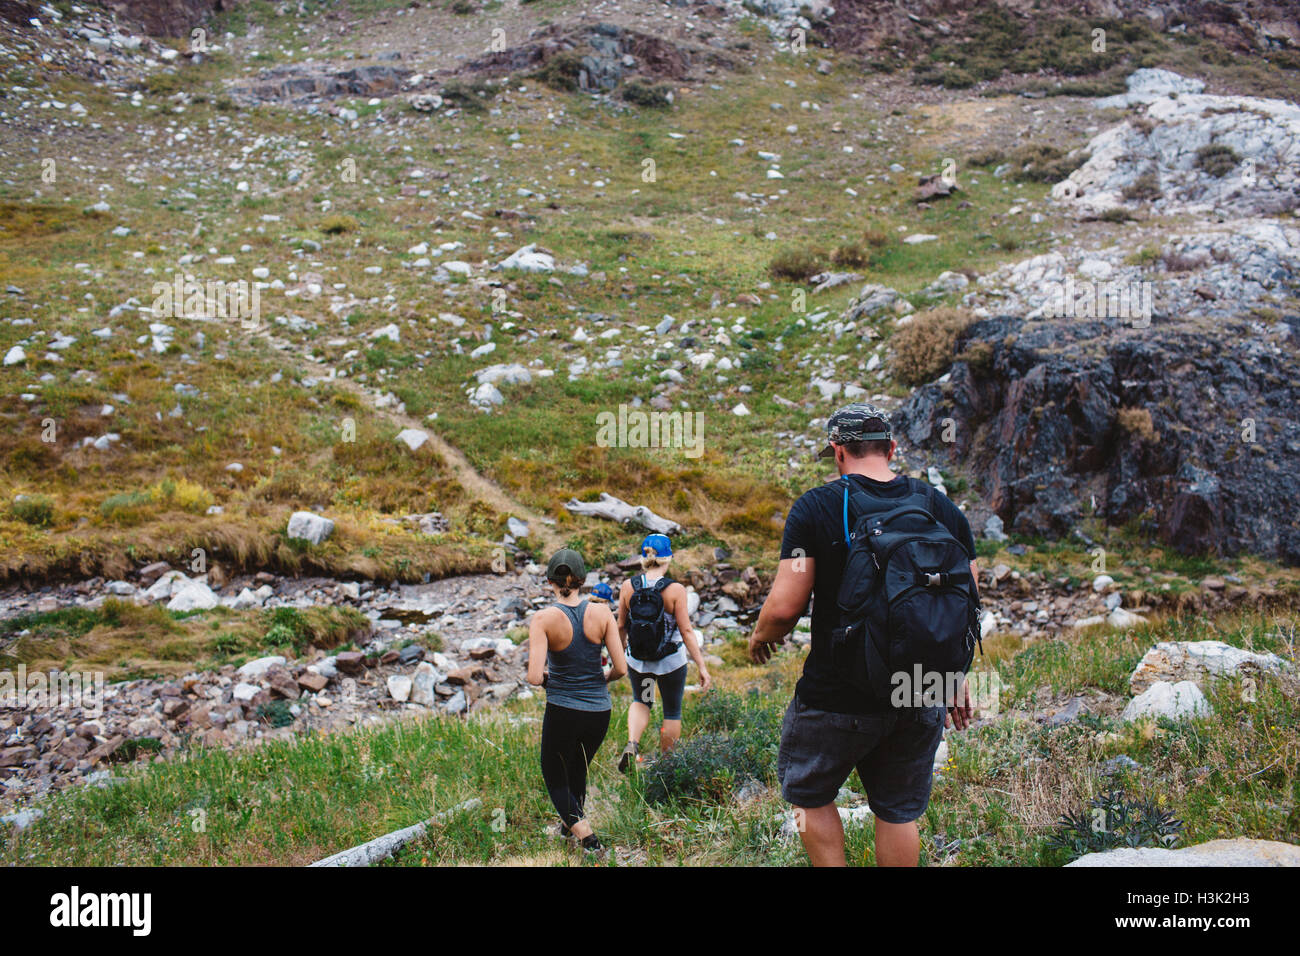 Three adults hiking down hill, rear view, Mineral King, Sequoia National Park, California, USA Stock Photo